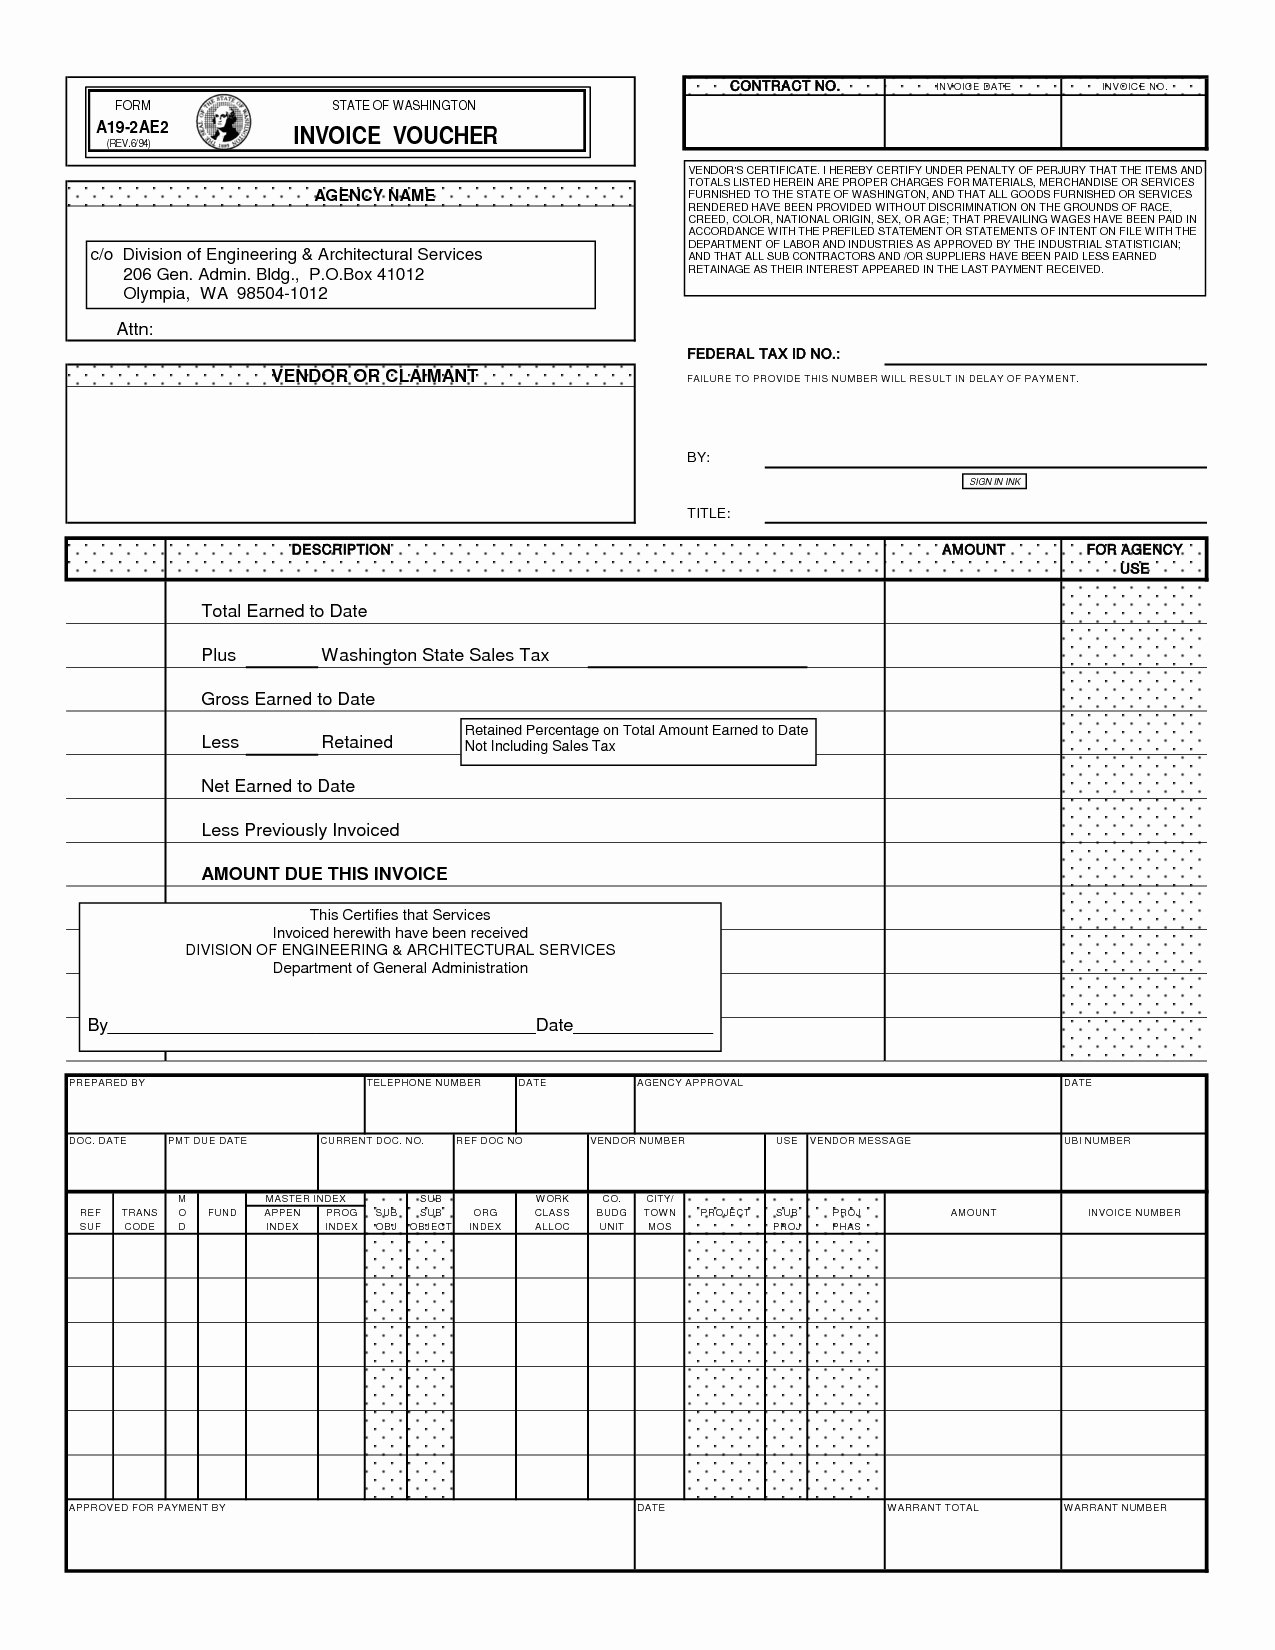 Independent Contractor Invoice Template Free Lovely Independent Contractor Invoice Invoice Template Ideas